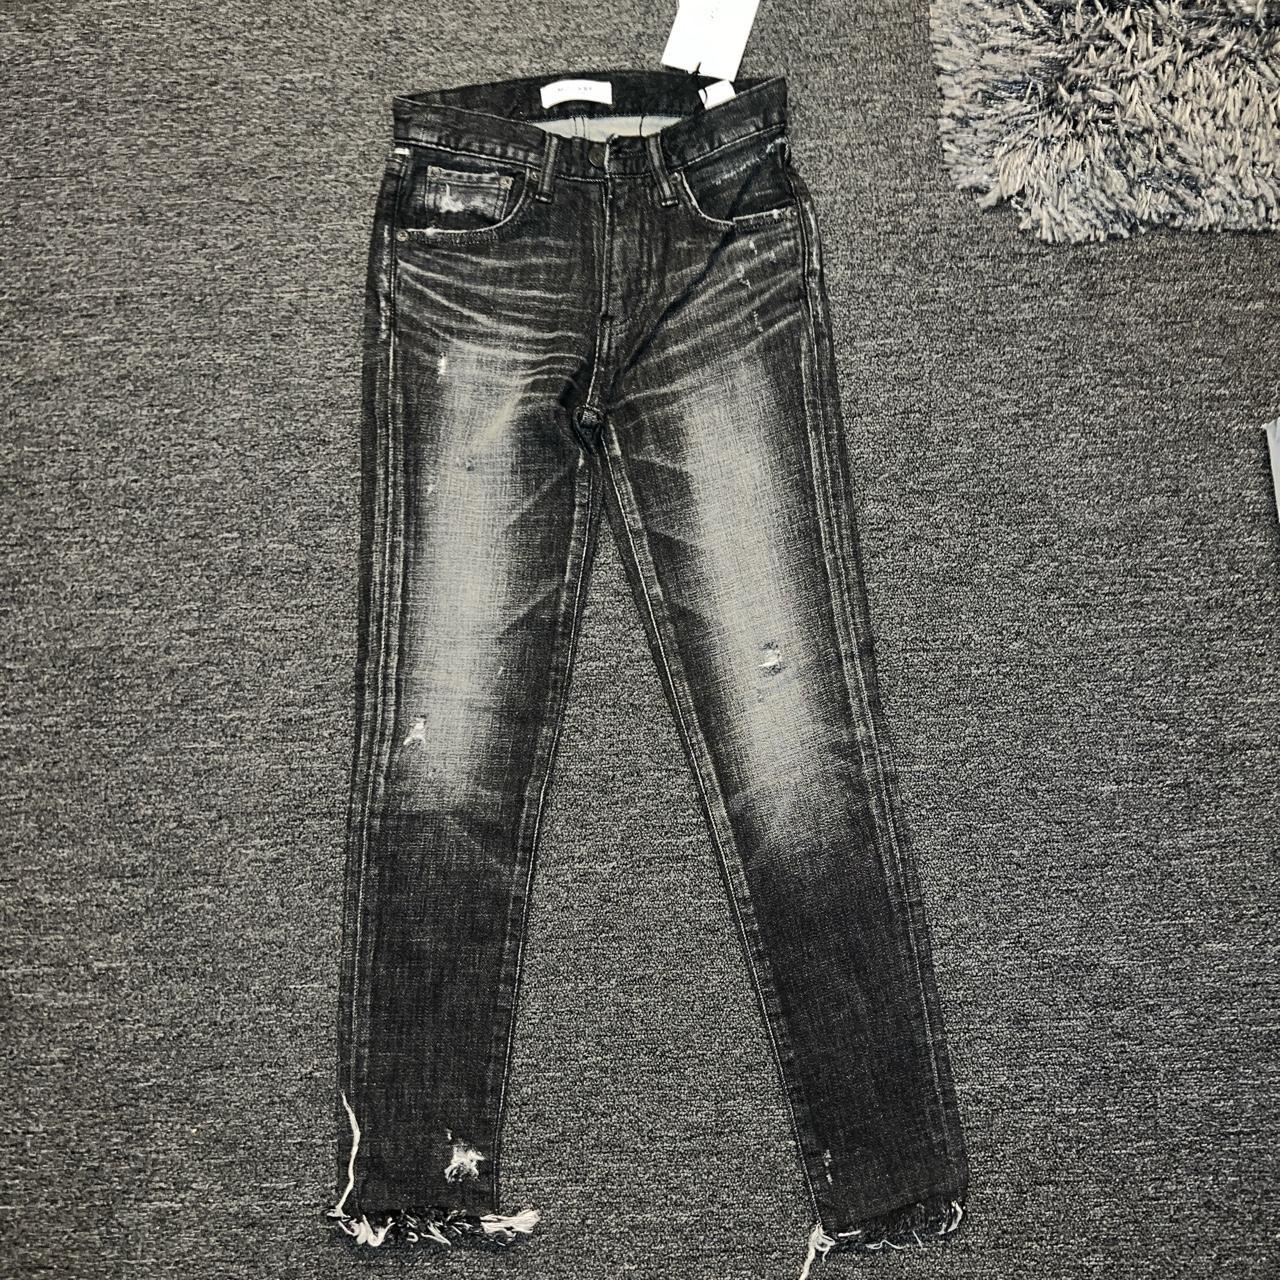 Moussy Vintage skinny jeans, Brand new with tag.